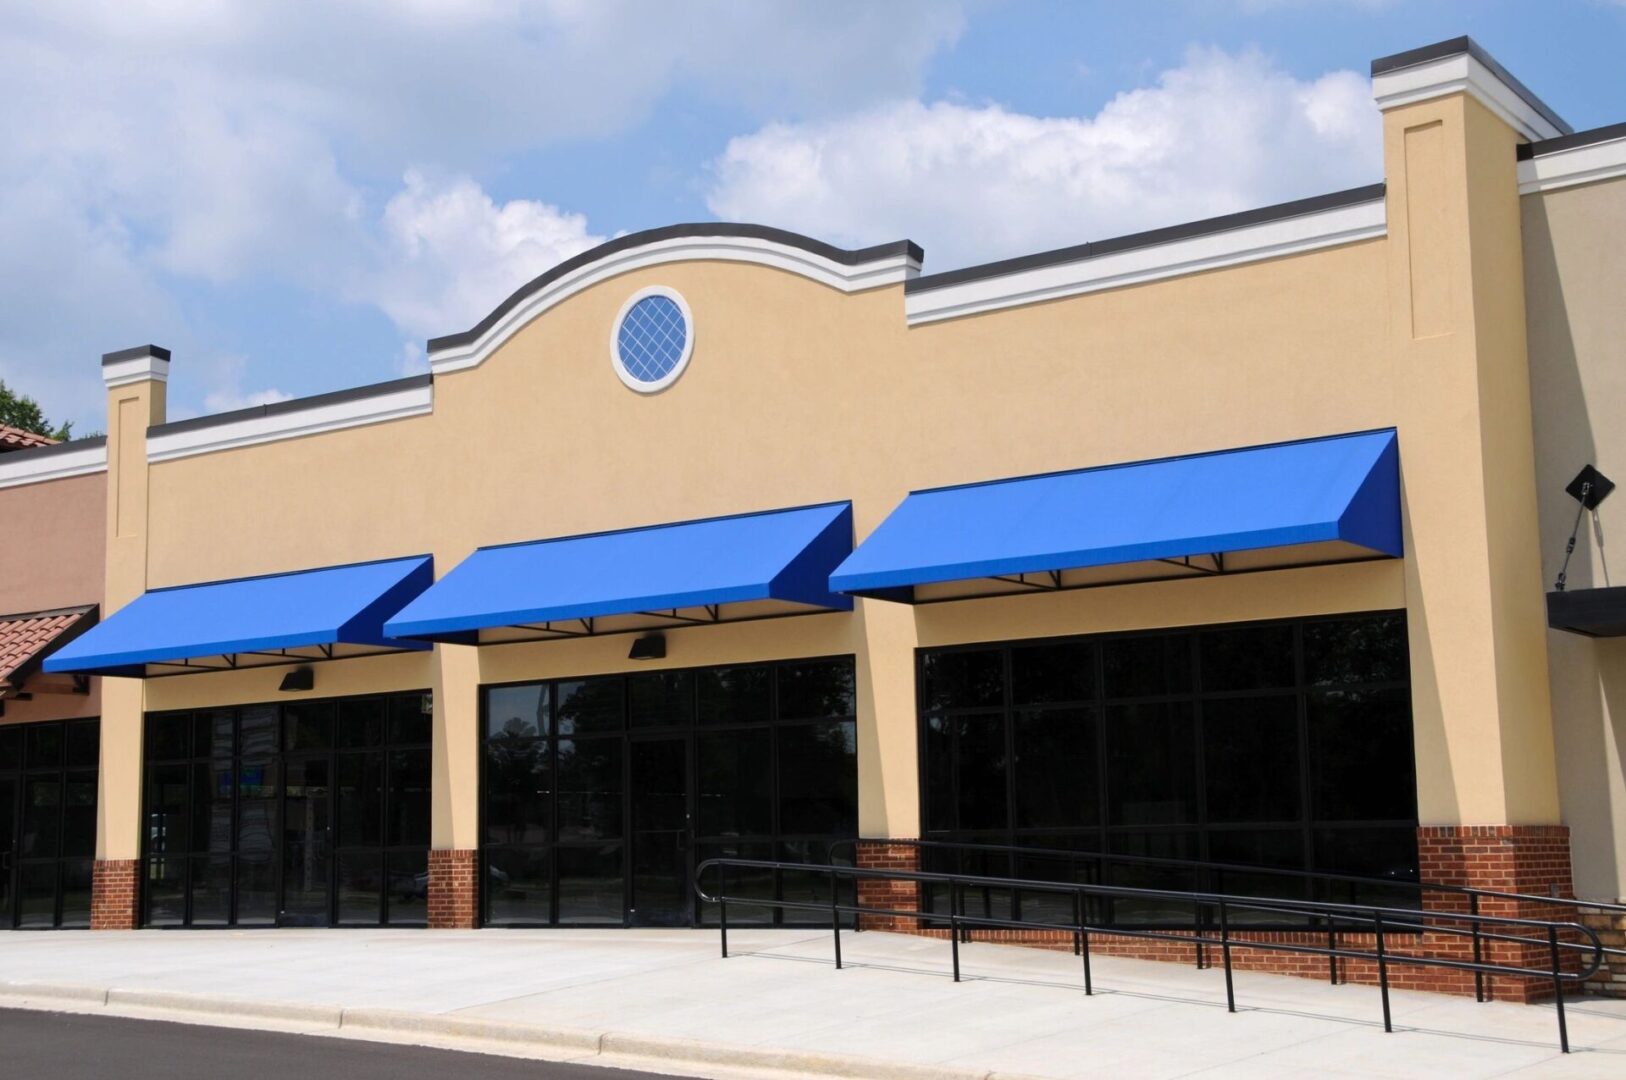 A store front with blue awnings and a sidewalk.